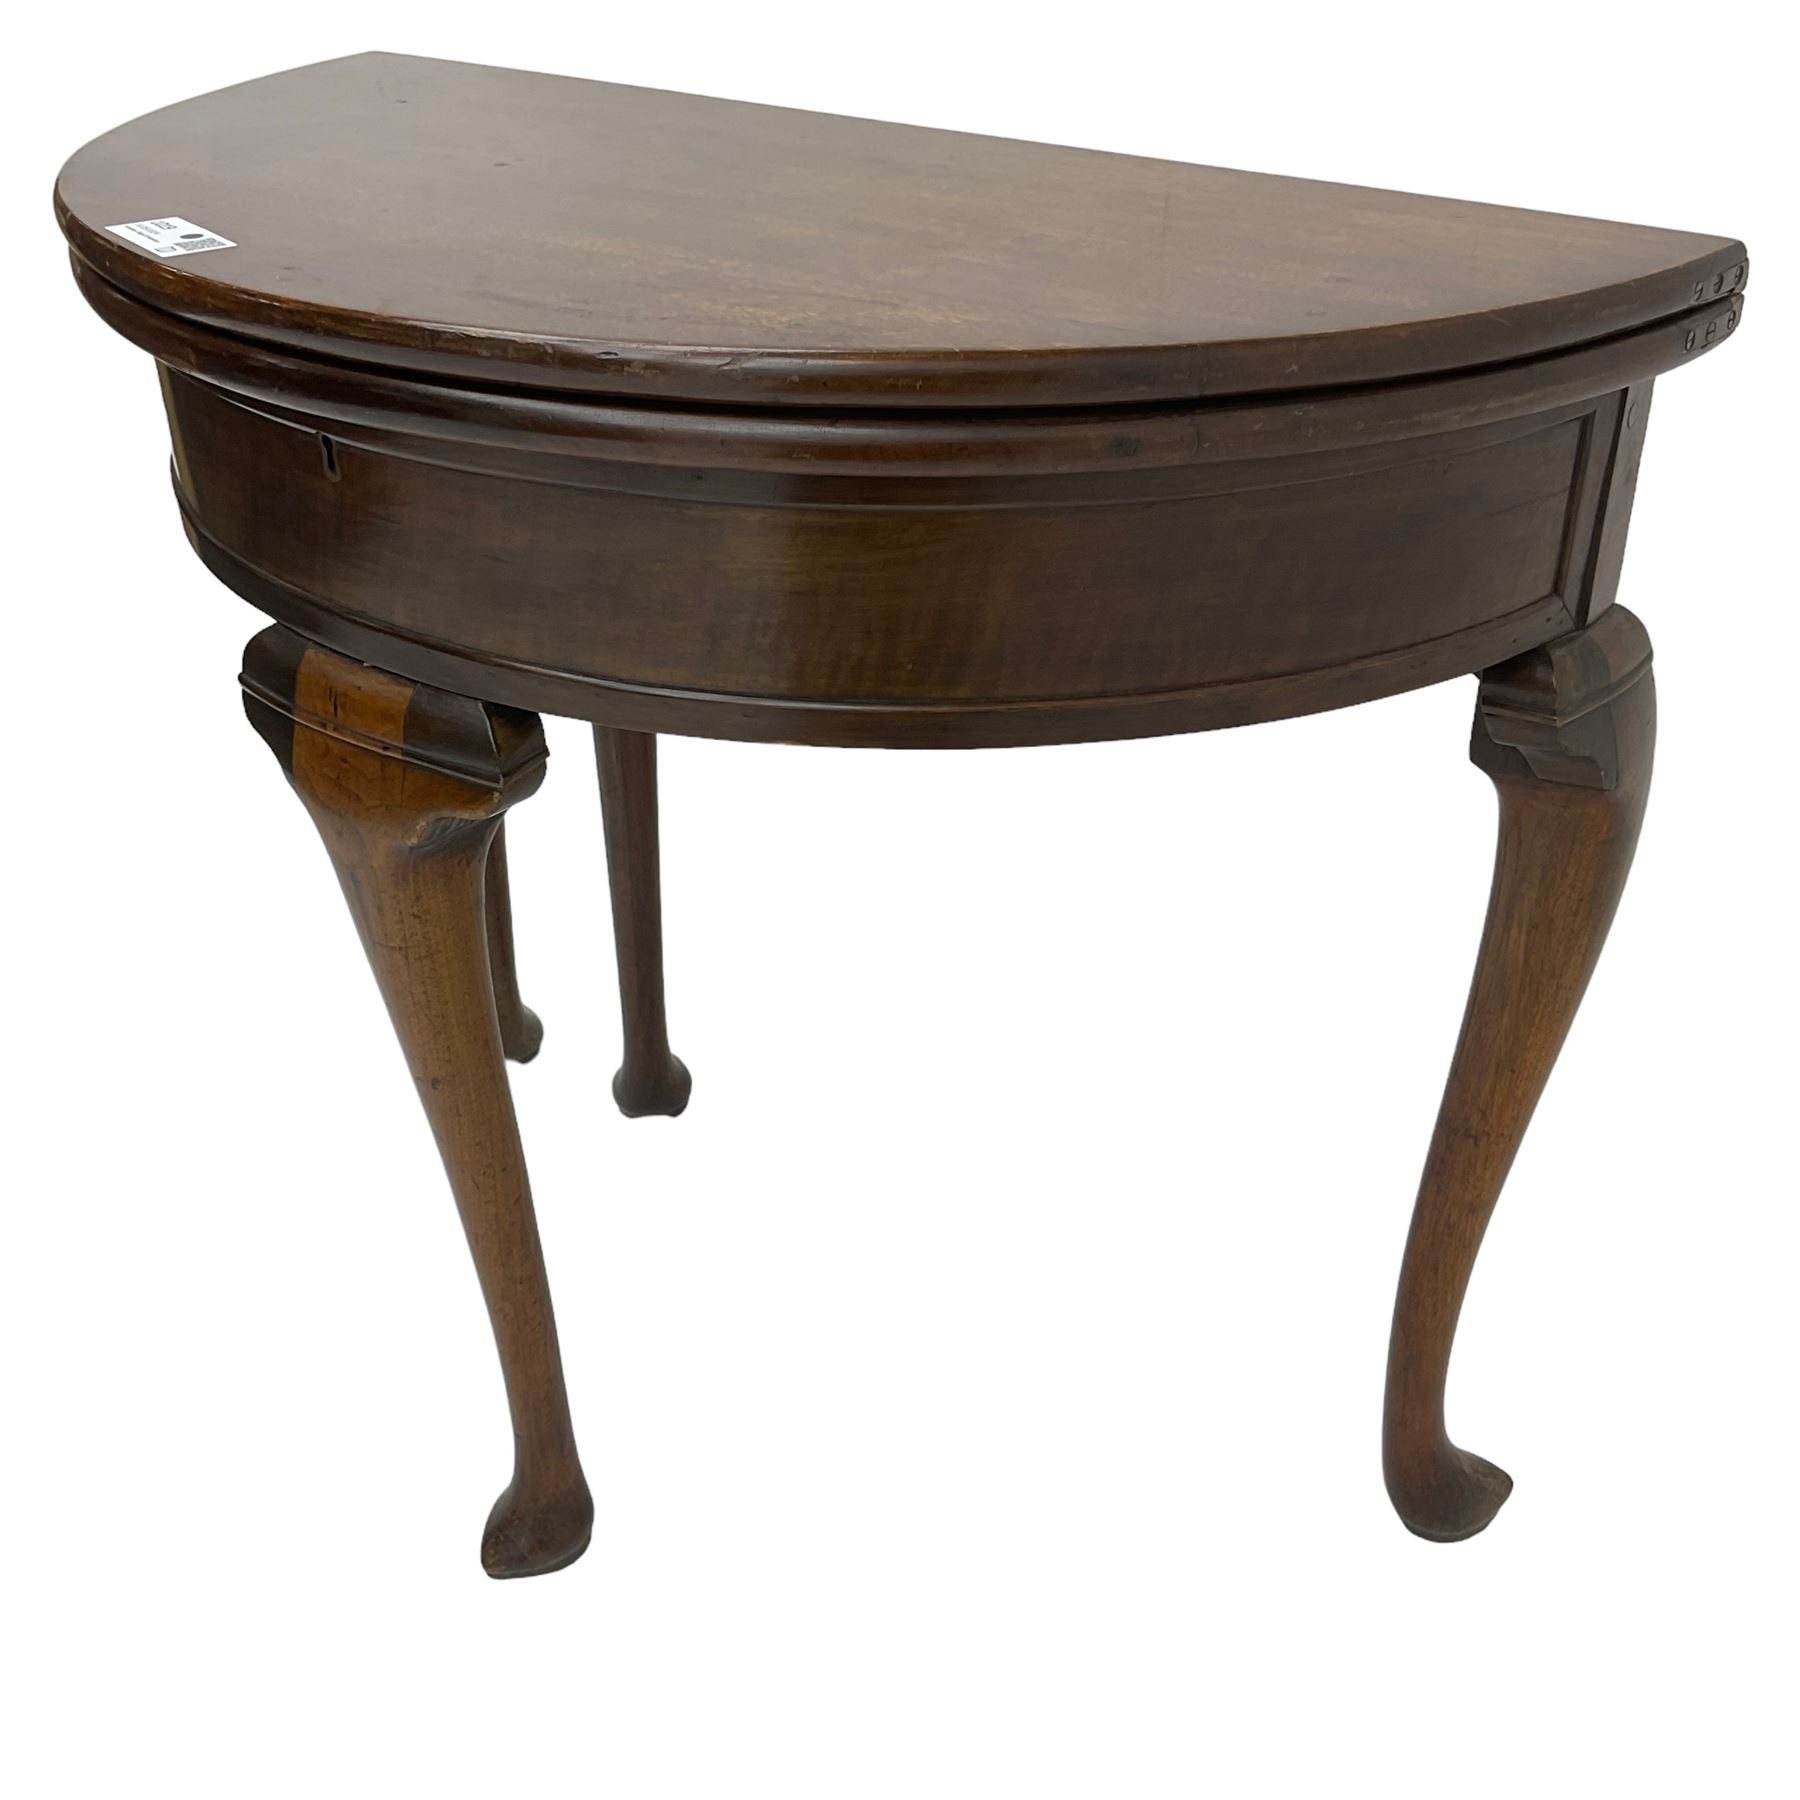 19th century walnut demi-lune side table - Image 4 of 6